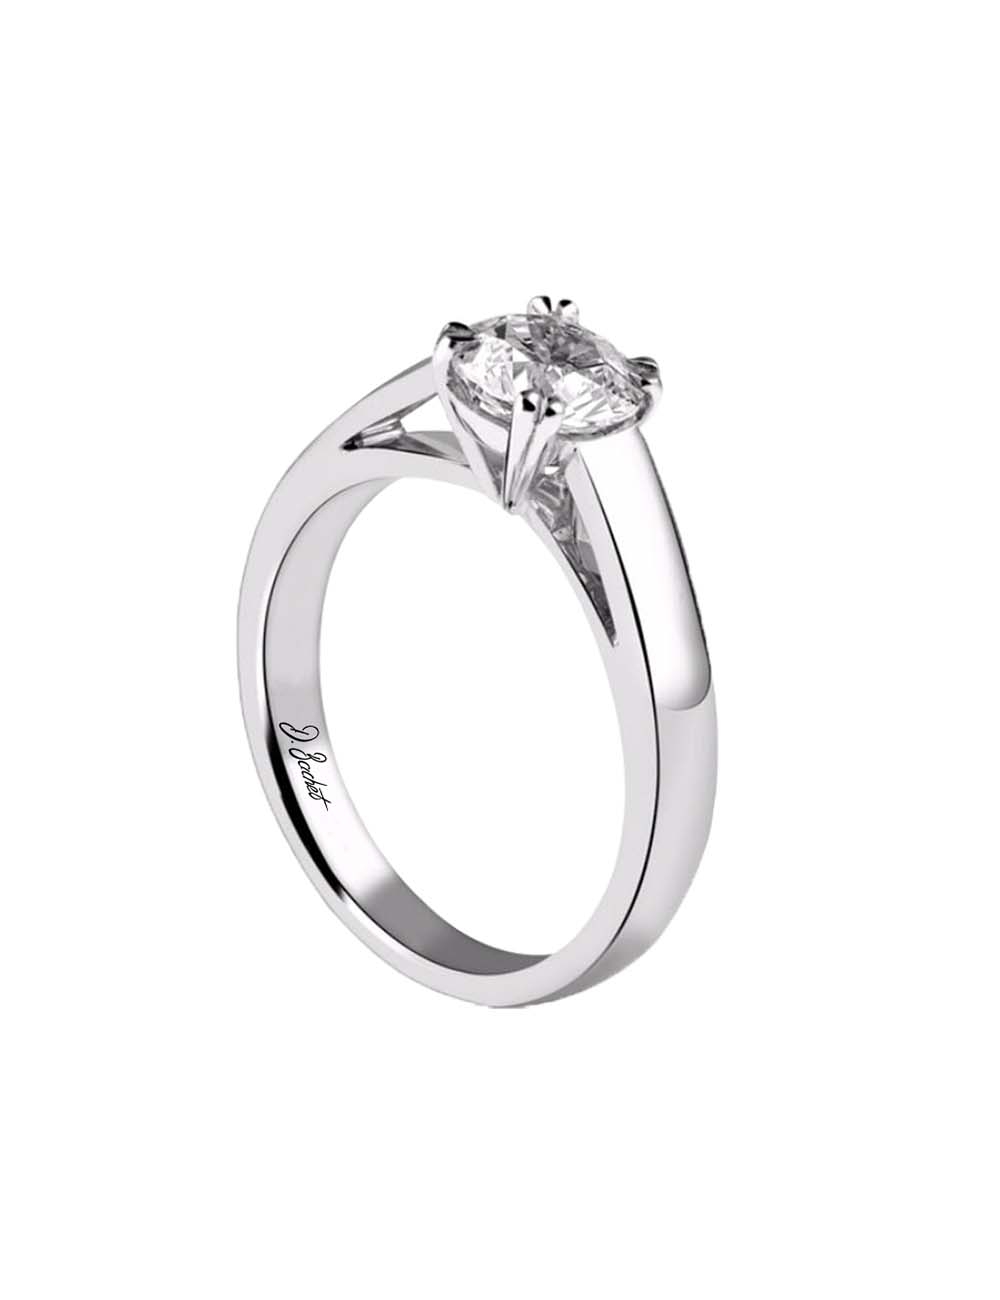 A solitaire diamond ring for those looking for a classic modern white diamond engagement ring